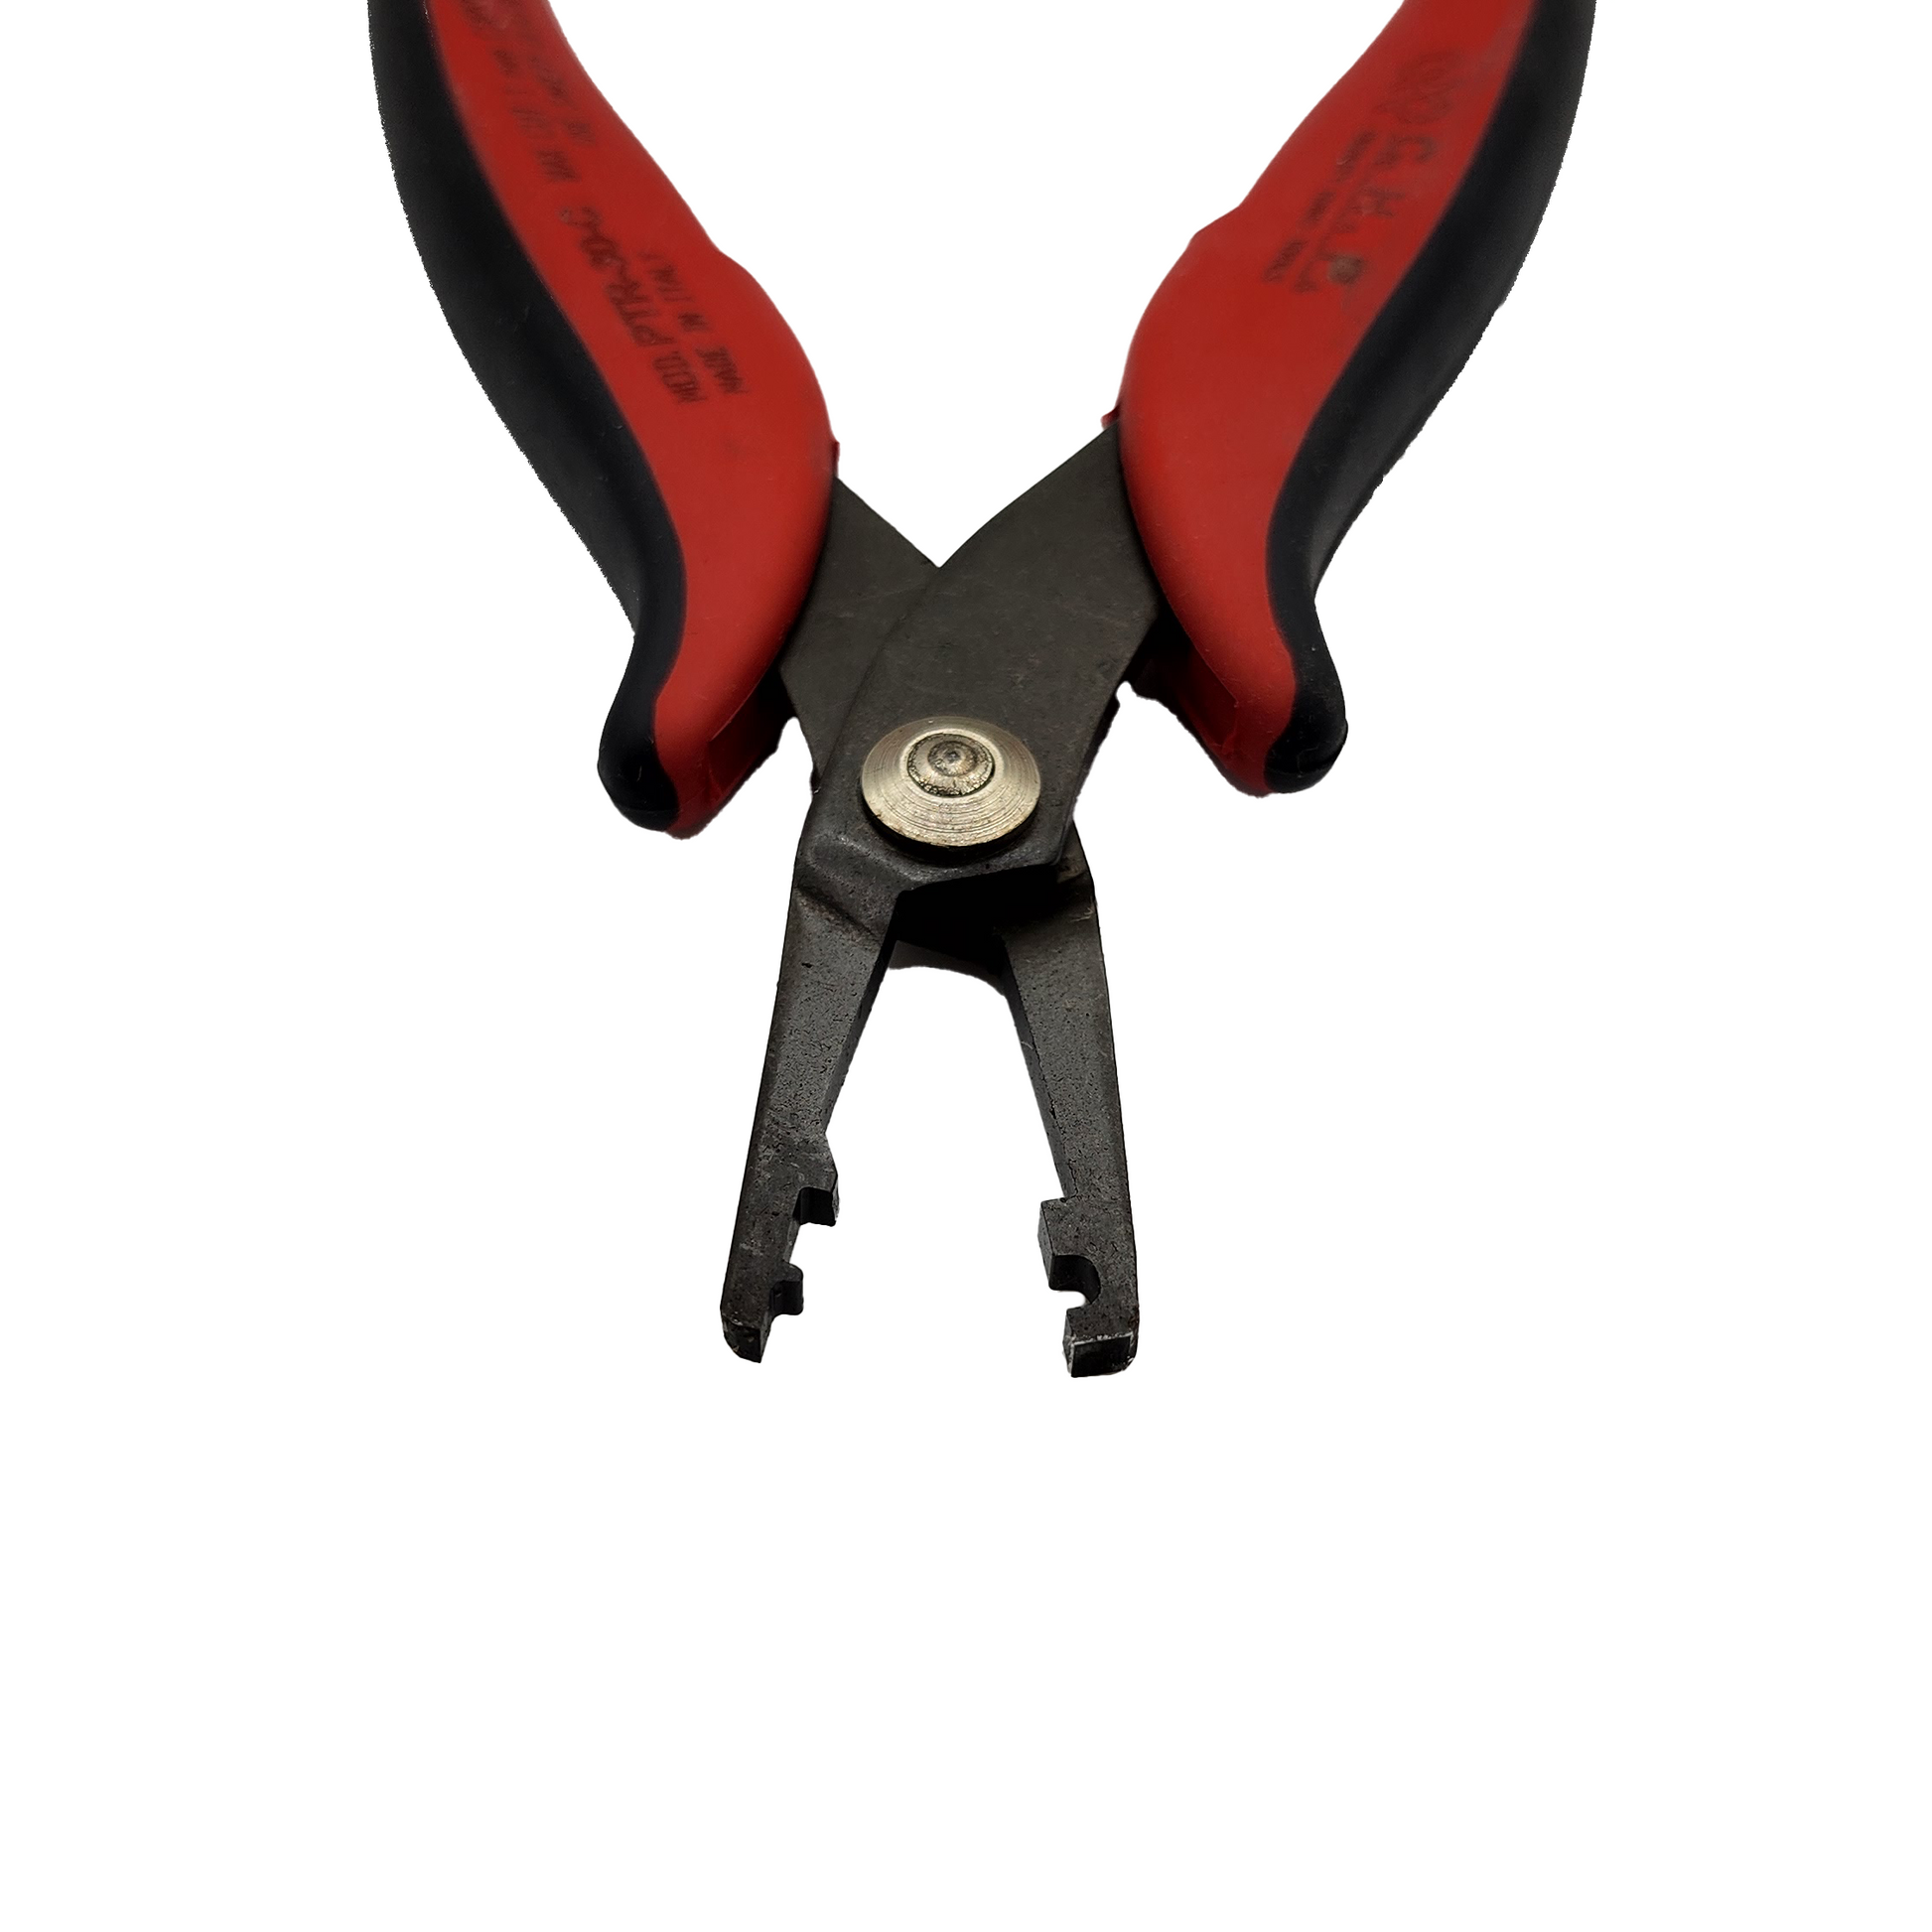 CHP_ CHP PTR-30-C Lead Forming Tool_ Cutters, Pliers, Multi-Tools_ Hakko Products